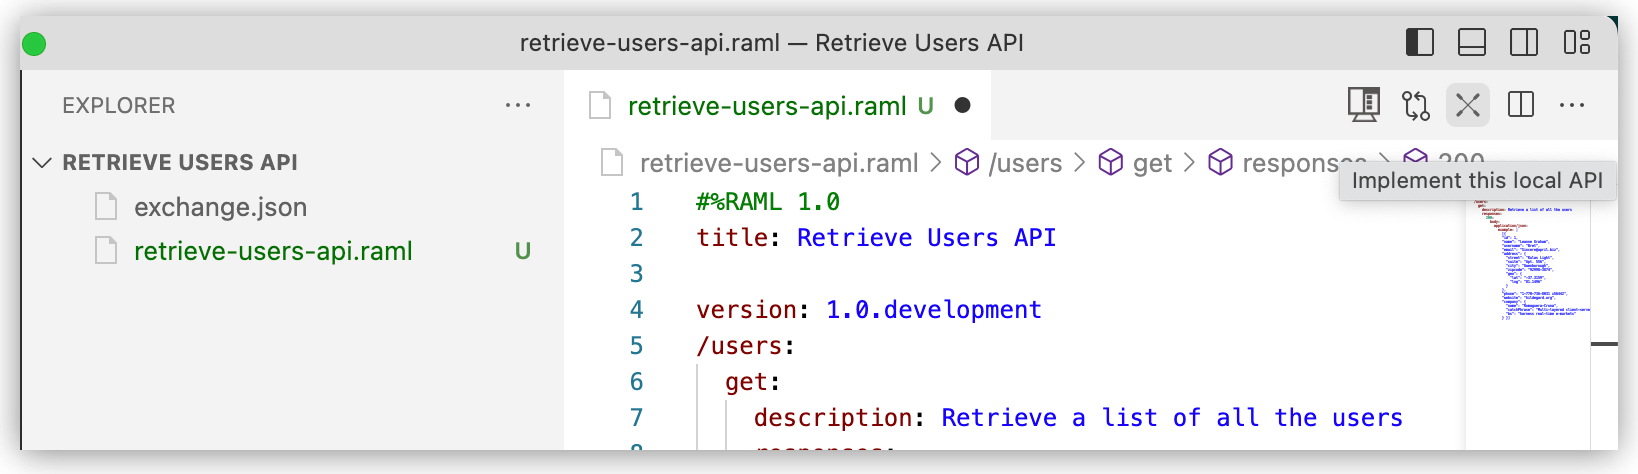 UI with the X-shaped icon for the command Implement this Local API